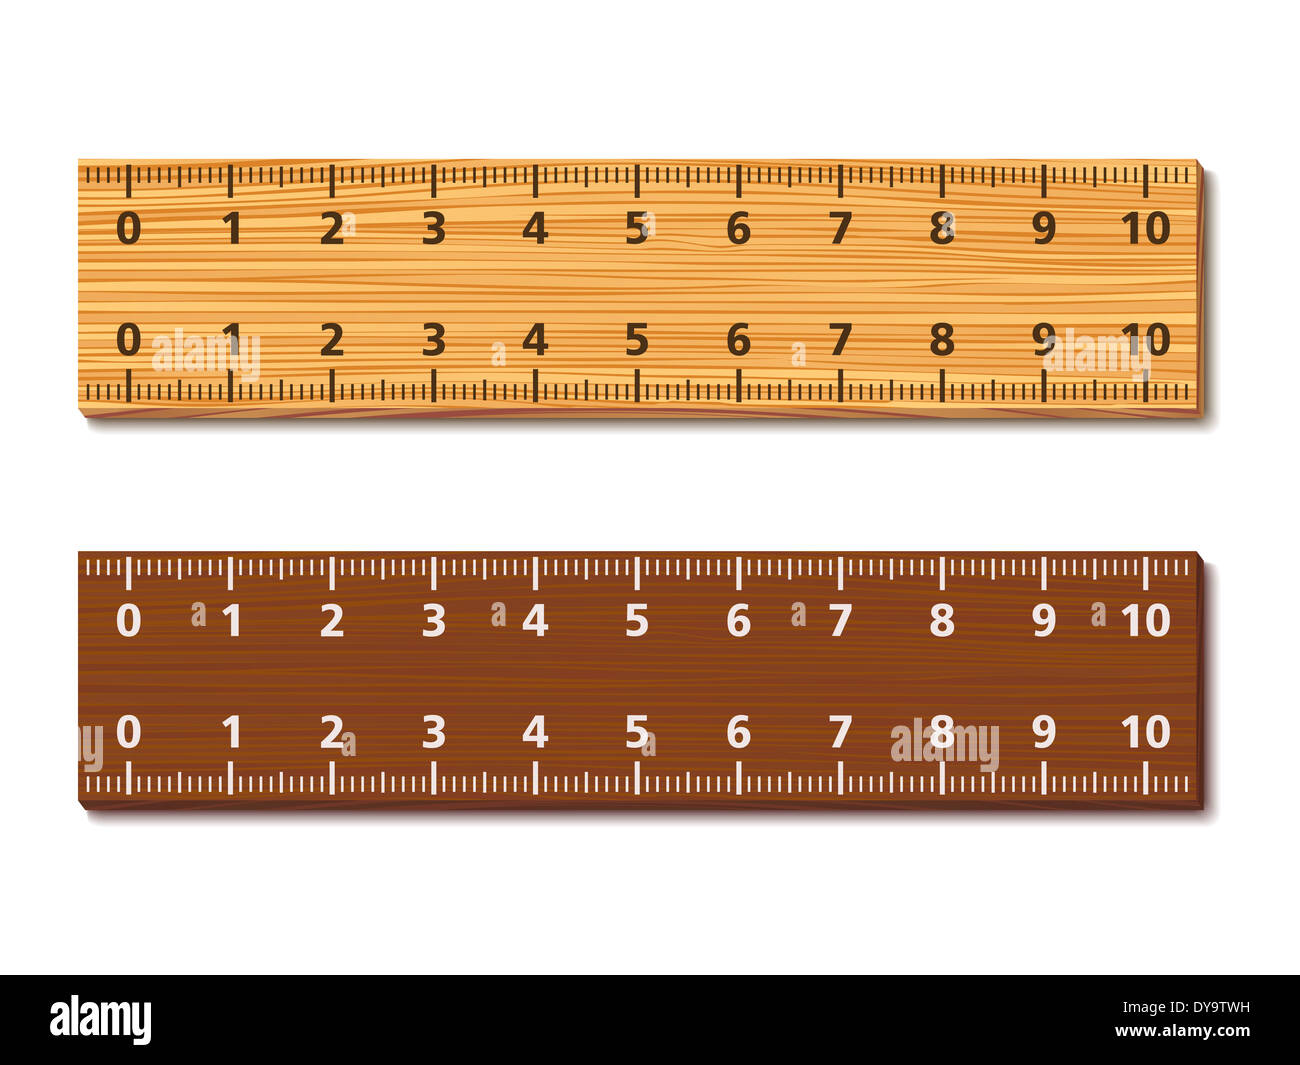 Wooden rulers on white background Stock Photo